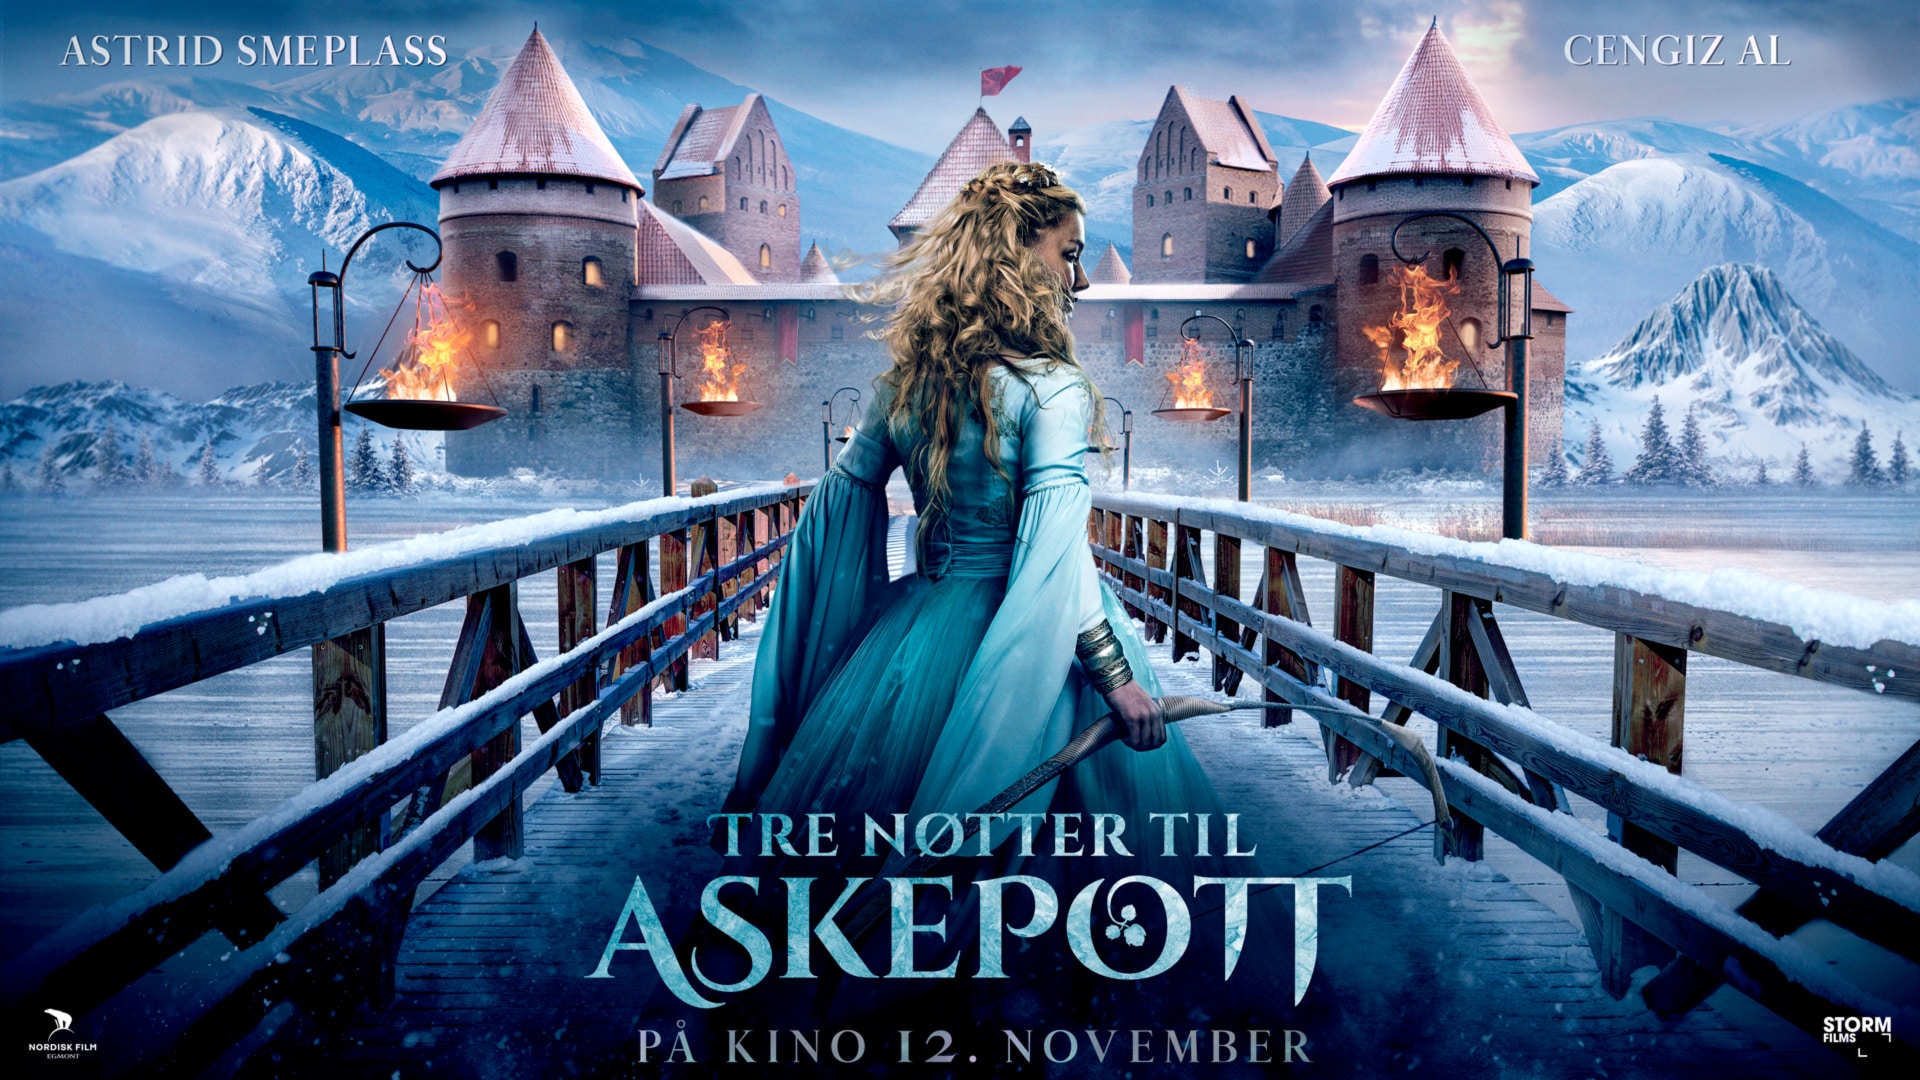 Cinderella with a bow in front of a castle on the promotional poster for movie Tre nøtter til Askepott.